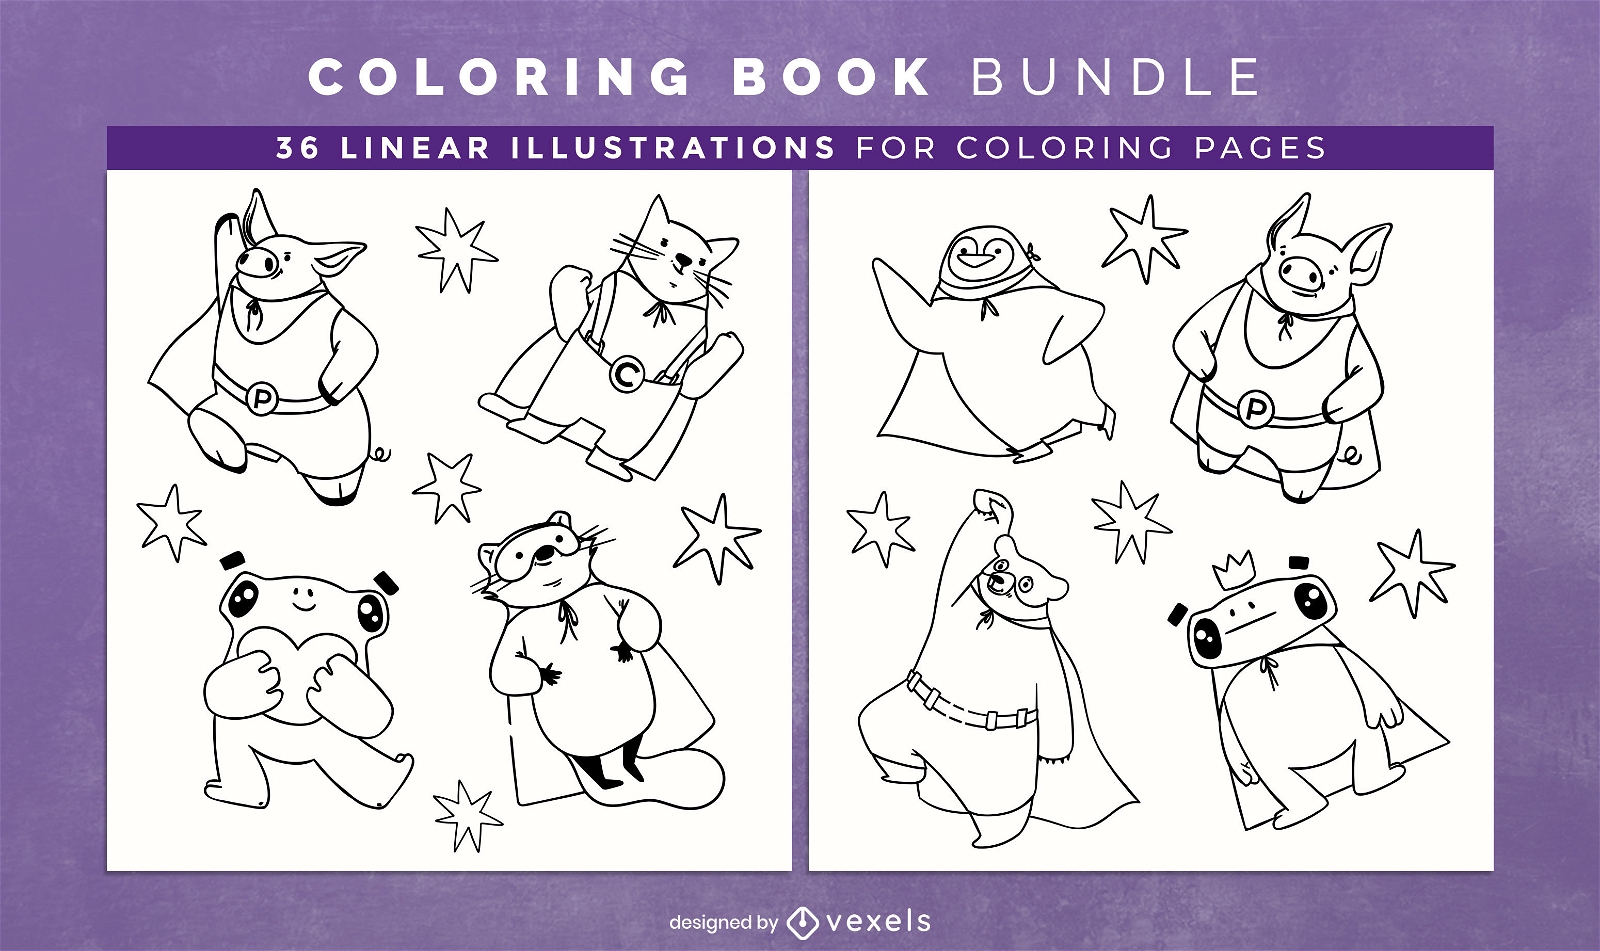 Superhero animals coloring book pages design